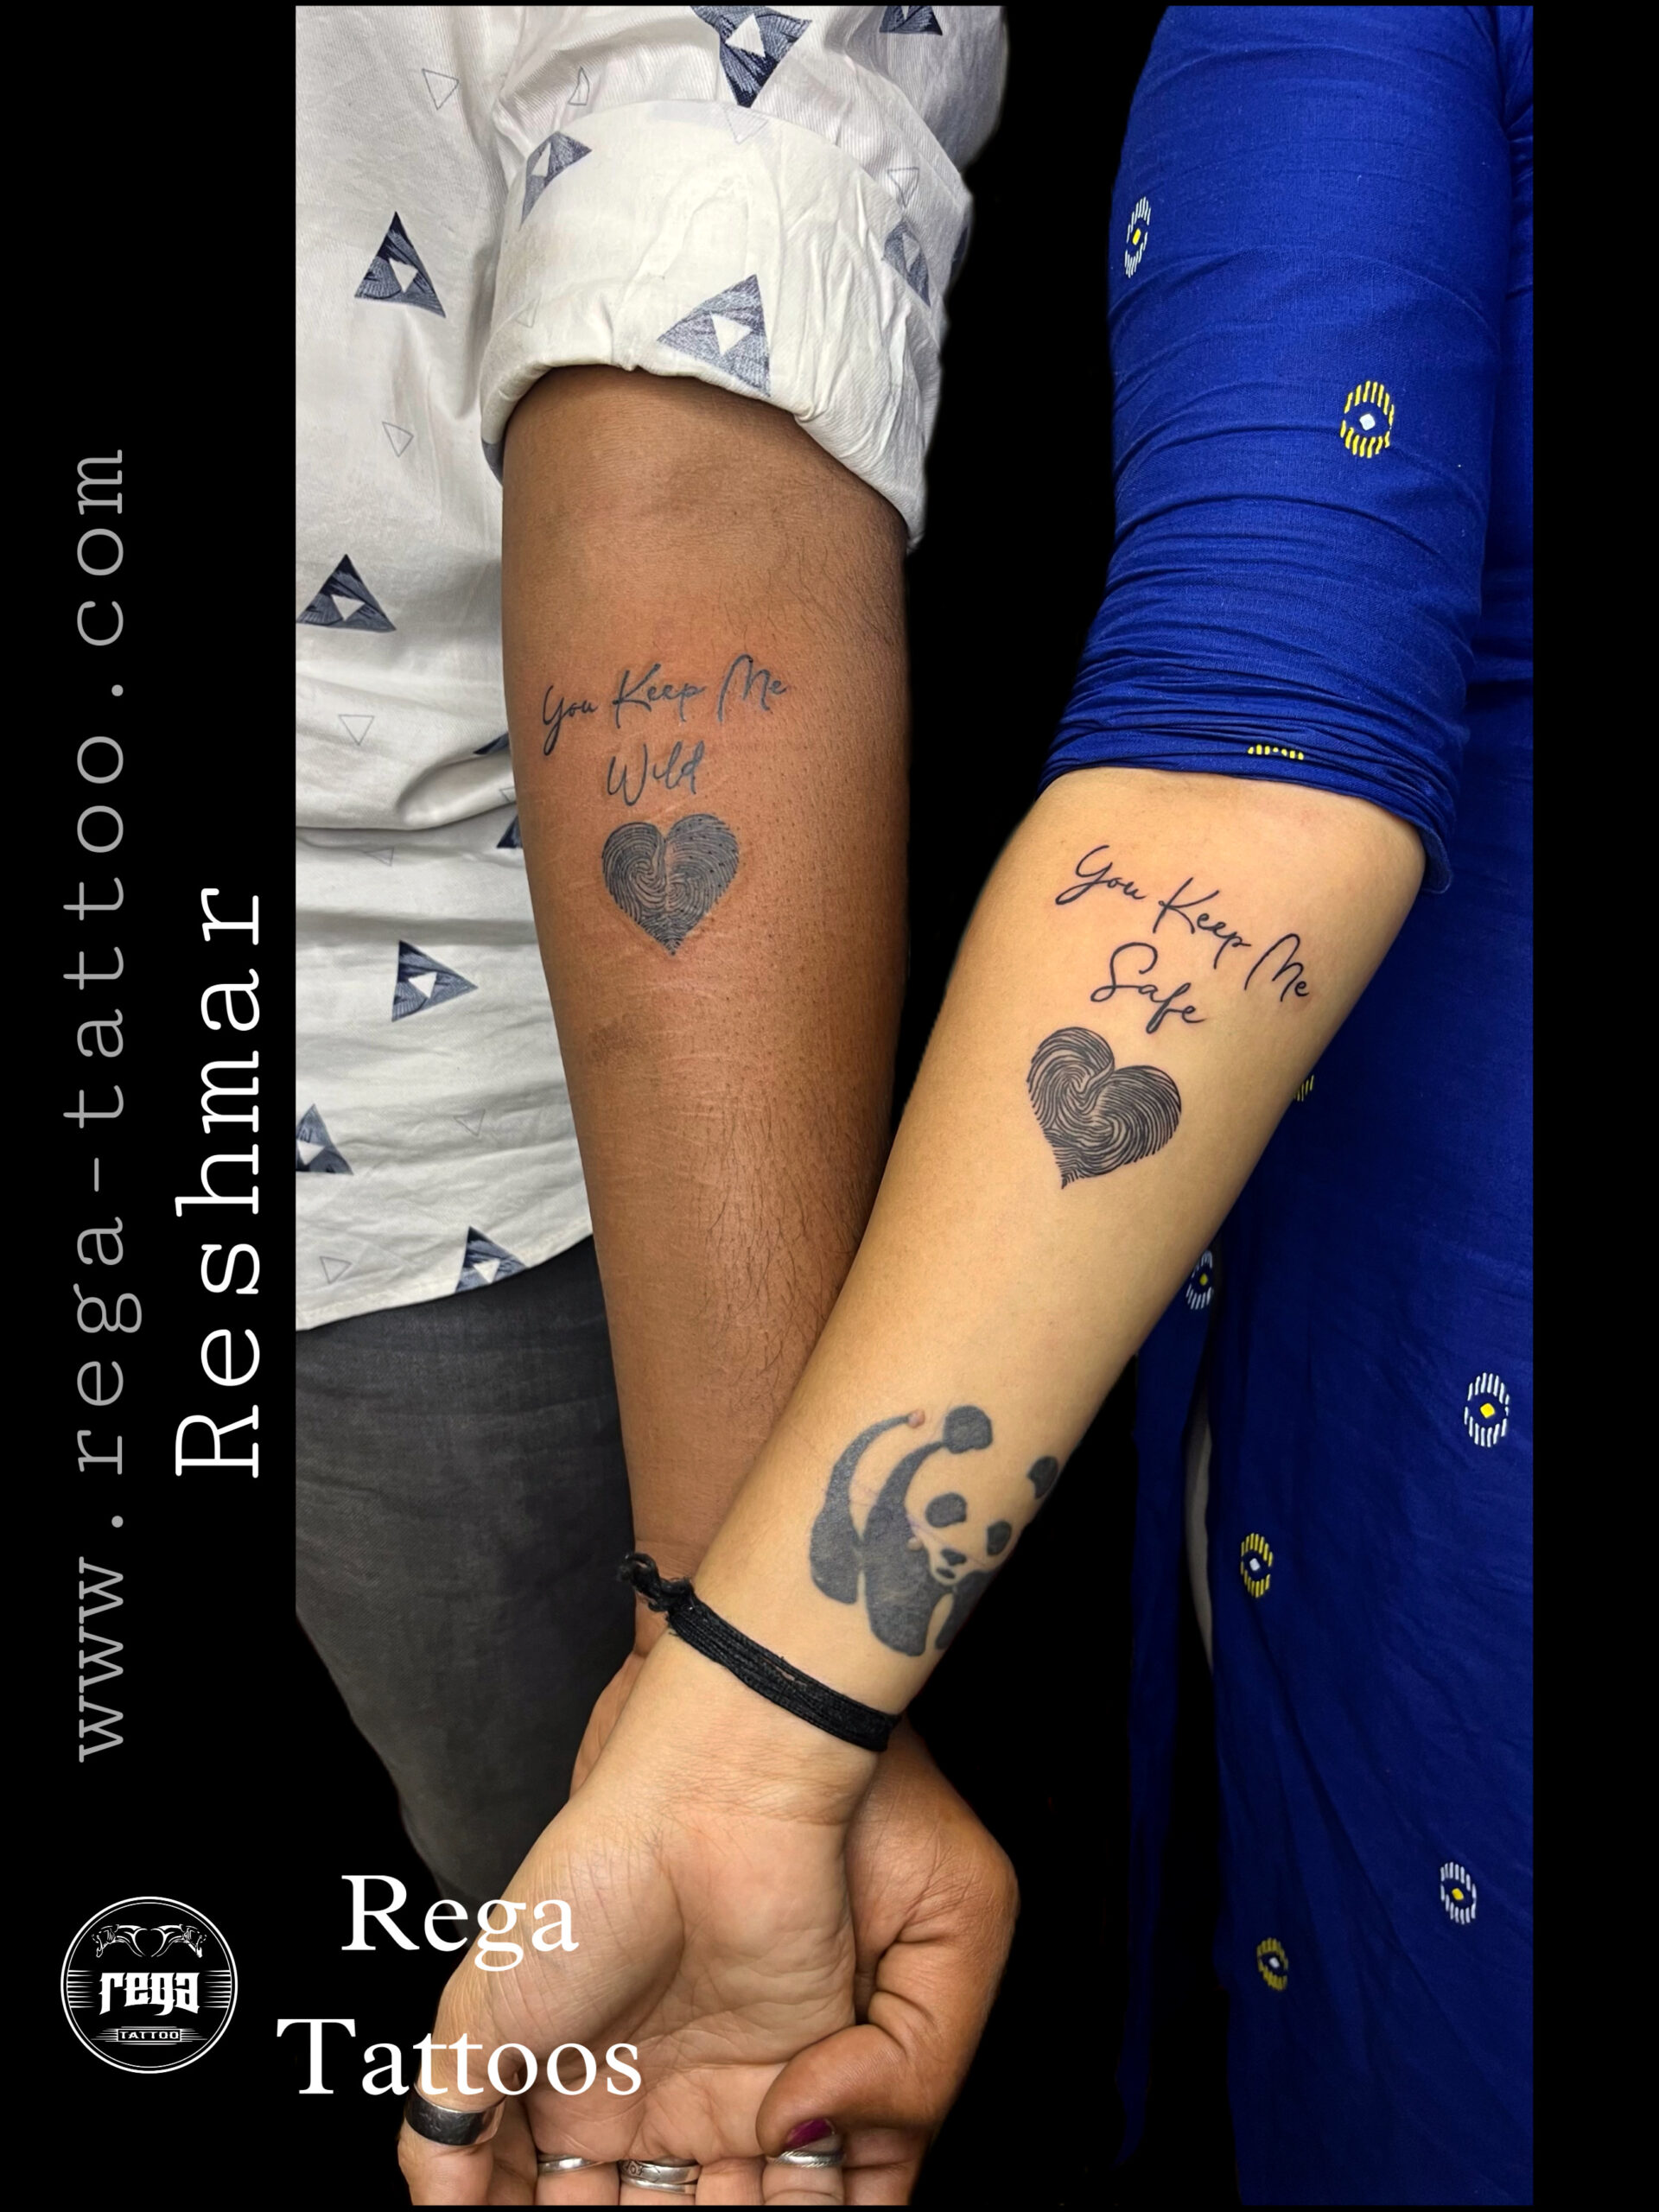 Beautiful couple tattoos are a great way to express your love and commitment to your partner in a permanent and meaningful way. Finger print tattoos, in particular, can be a subtle and intimate way to showcase your connection with your loved one. When looking for a tattoo shops near me in Chennai that specializes in couple tattoos, it's important to find an artist who has experience with finger print tattoos and can work with you to create a design that reflects your relationship. The artist should be able to guide you through the design process, help you choose the right placement for the tattoo, and ensure that the tattoo is done safely and hygienically. Finger print tattoos can be done in a variety of styles and sizes, from small and simple designs to larger and more complex ones. Some couples choose to get matching finger print tattoos, while others opt for complementary designs that incorporate each other's fingerprints in a unique and creative way. Ultimately, finger print tattoos can be a beautiful and personal way to celebrate your love and commitment to your partner. Finding a talented and experienced tattoo artist near you in Chennai who can help bring your vision to life is key to creating a meaningful and long-lasting couple tattoo.